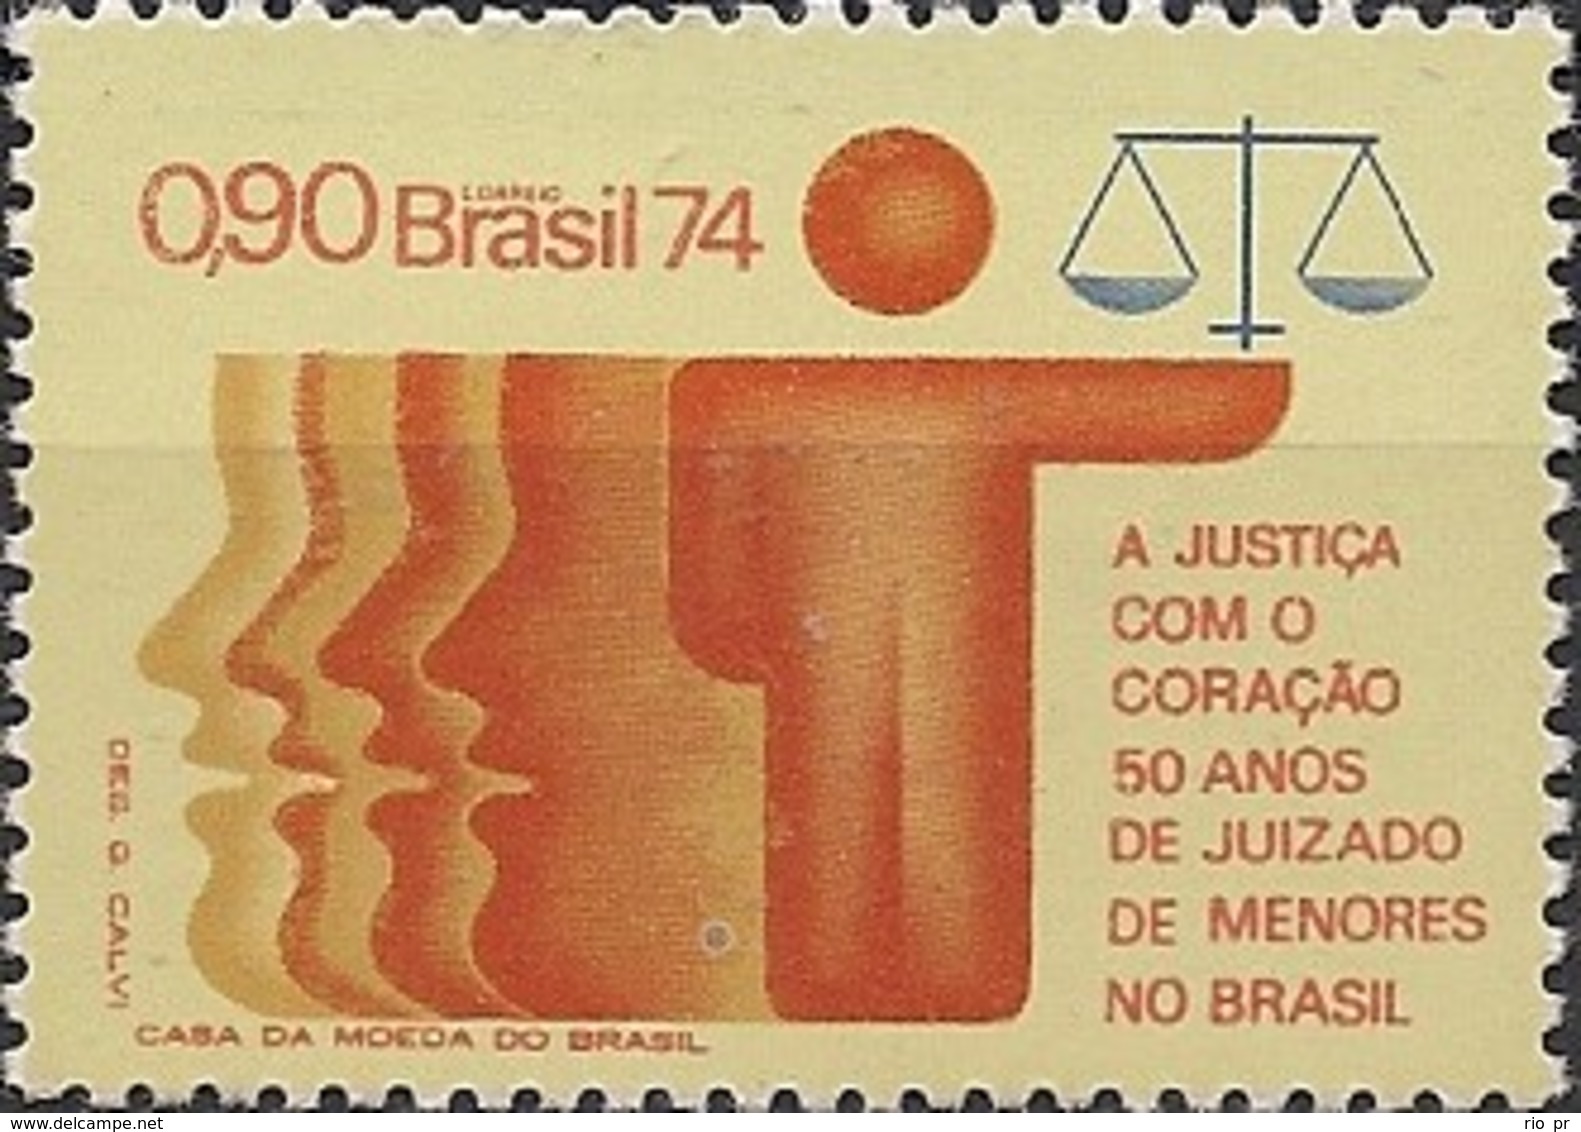 BRAZIL - JUVENILE COURT OF BRAZIL, 50th ANNIVERSARY 1974 - MNH - Unused Stamps